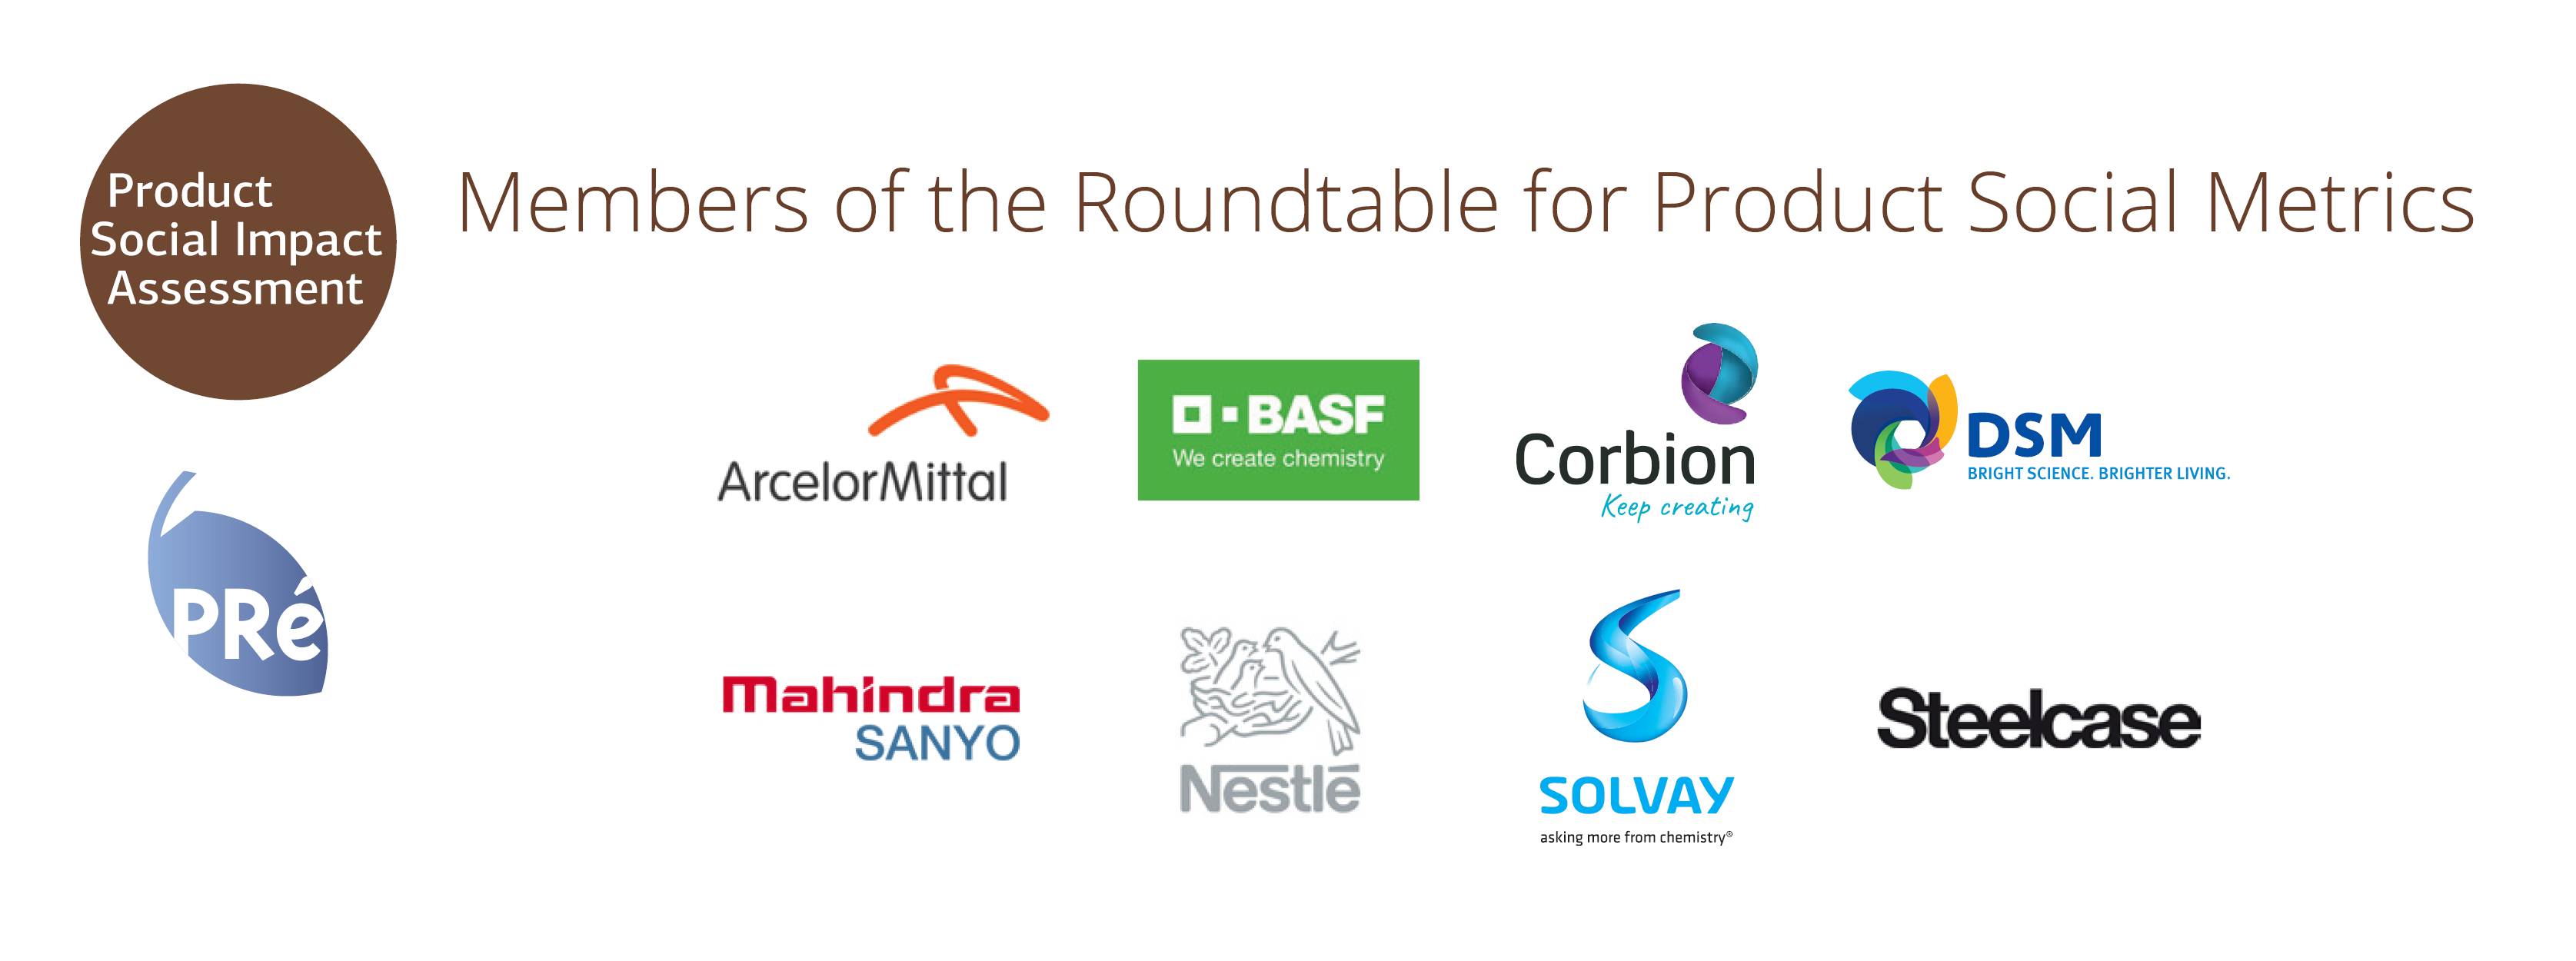 Members of the Roundtable for Product Social Metrics